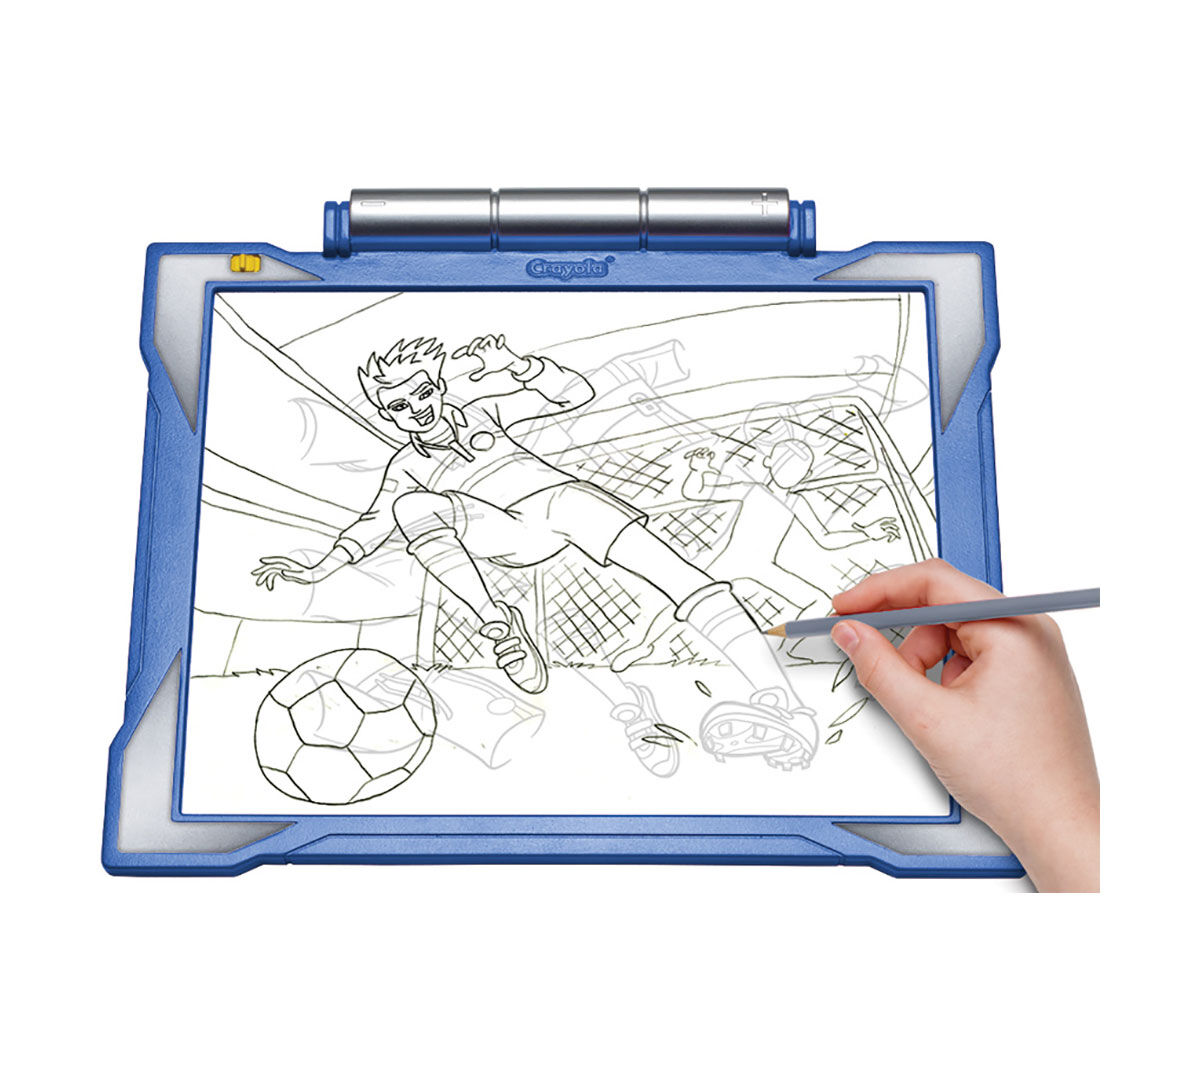 Crayola; Lightup Tracing Pad; Blue; Art Tool; Bright LEDs; Easy